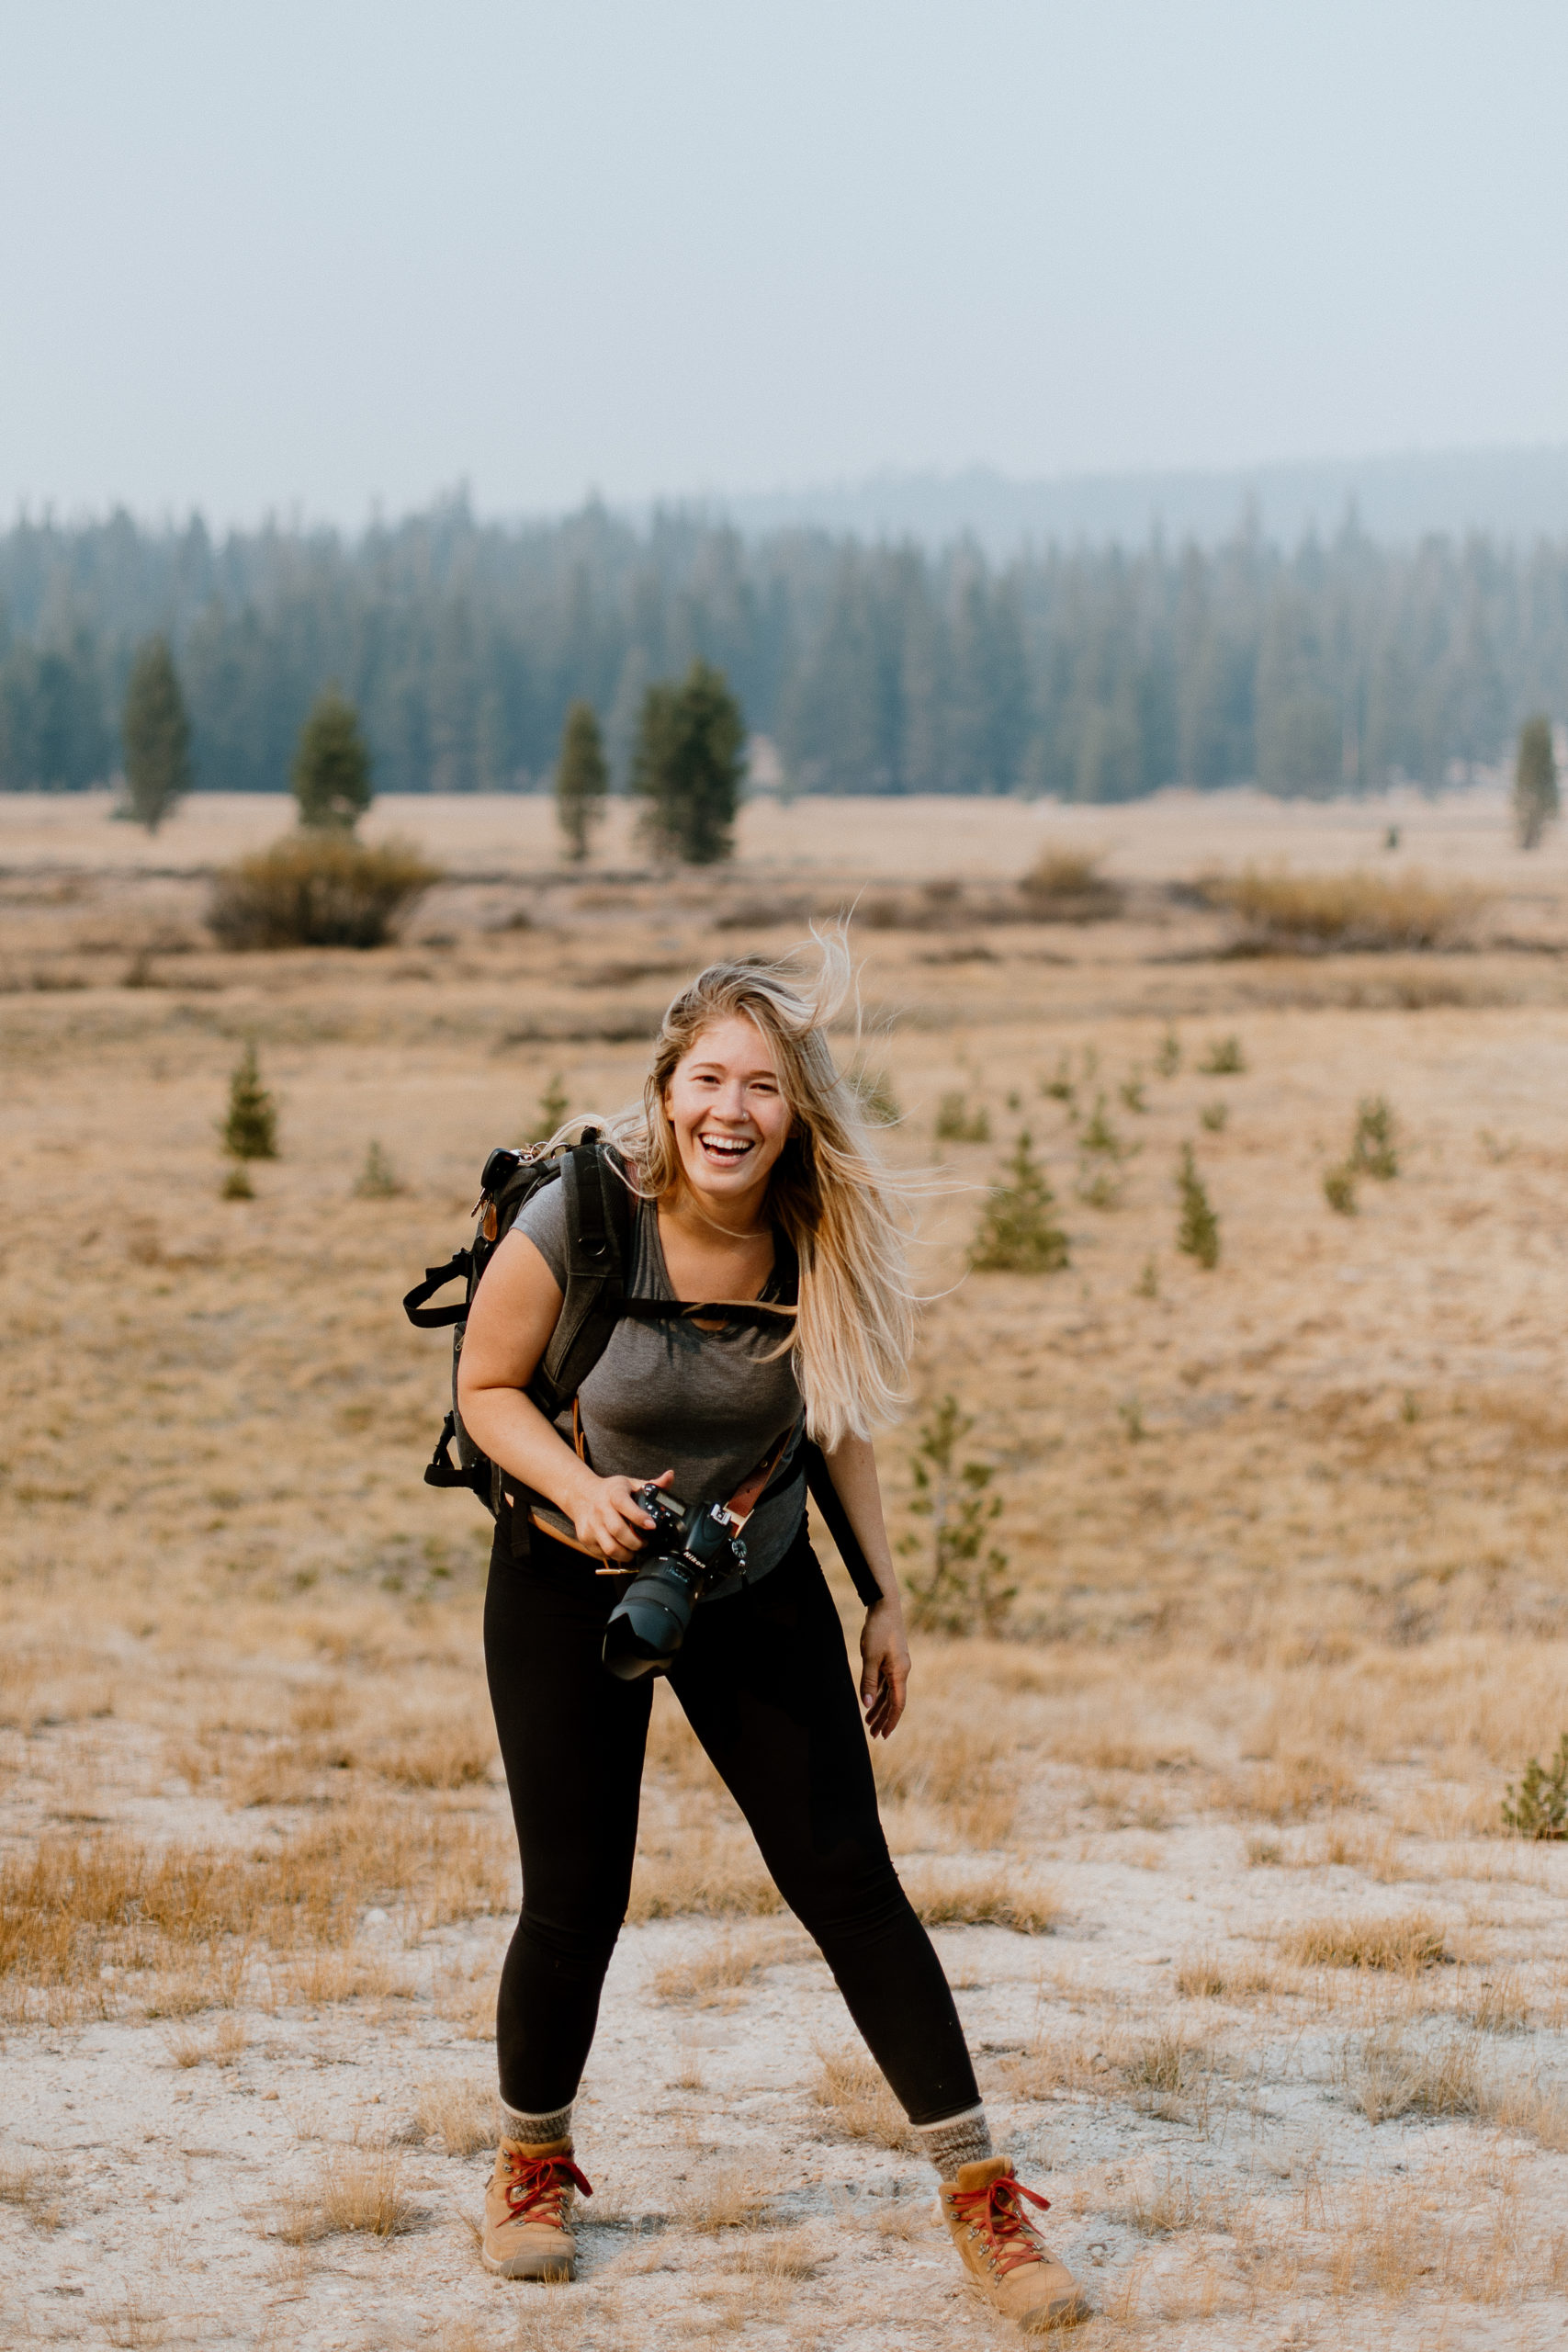 Girl holding camera while laughing with trees behind her